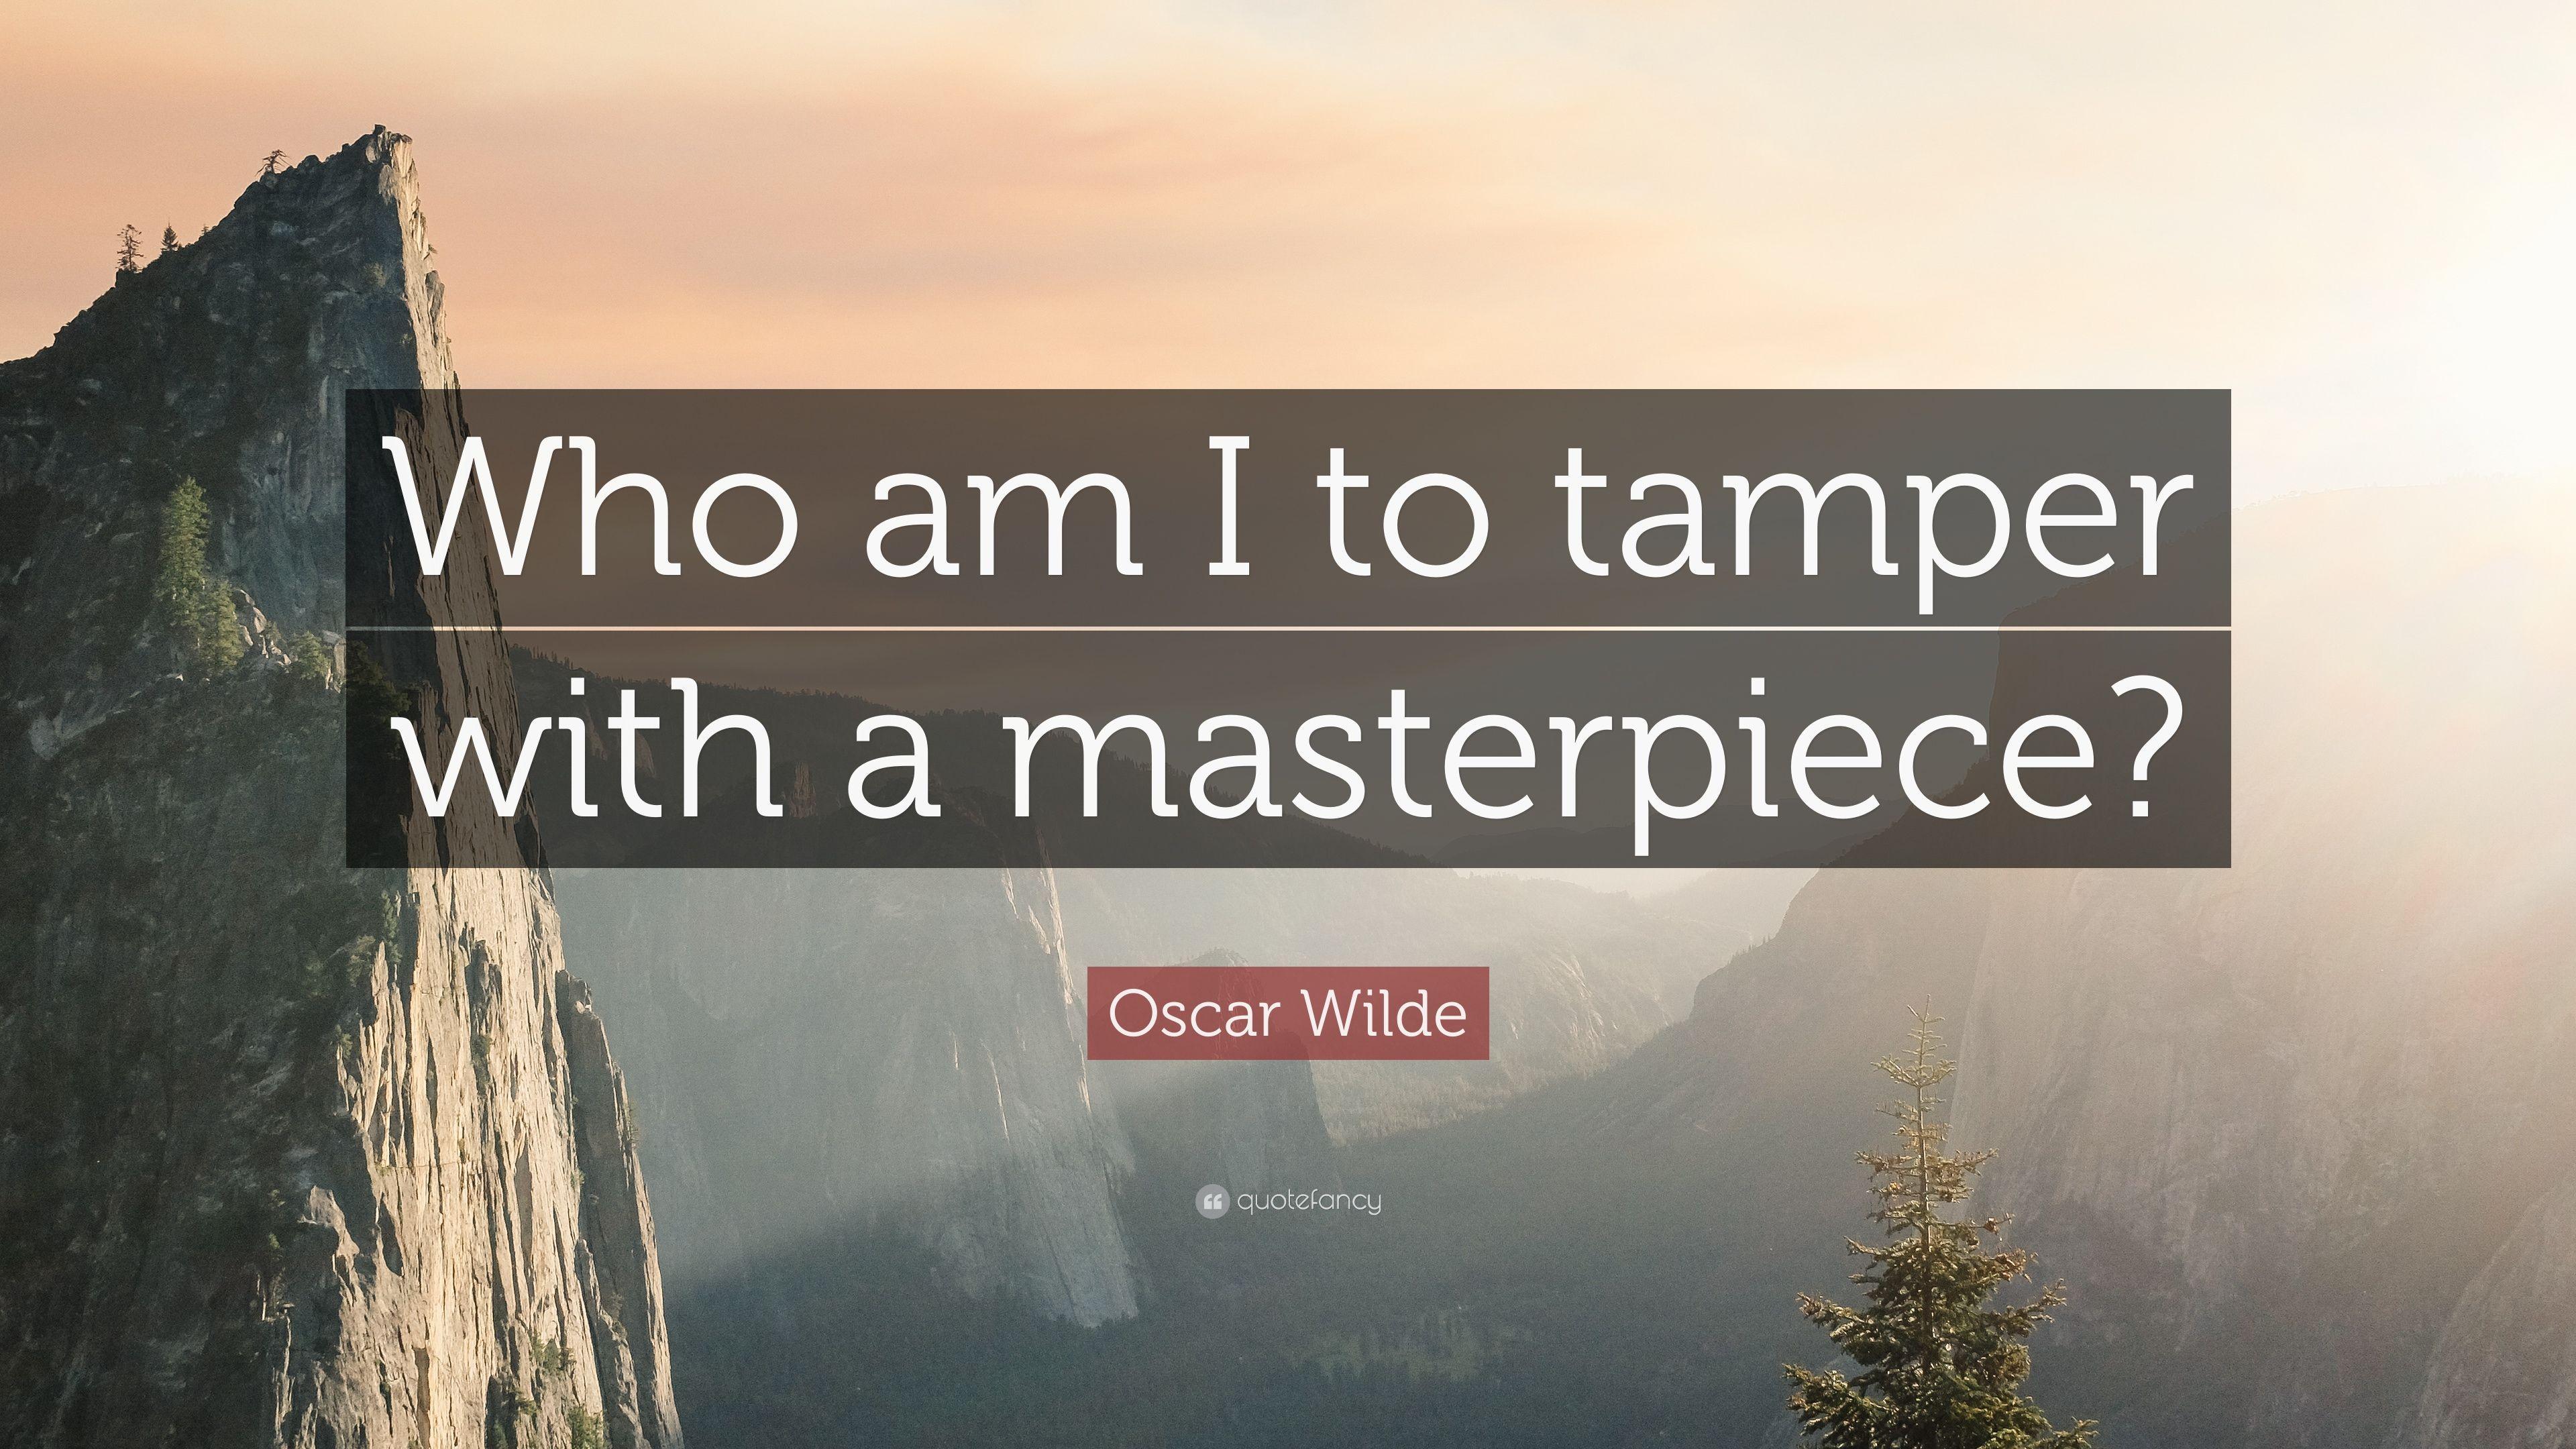 Oscar Wilde Quote: “Who am I to tamper with a masterpiece?” 5